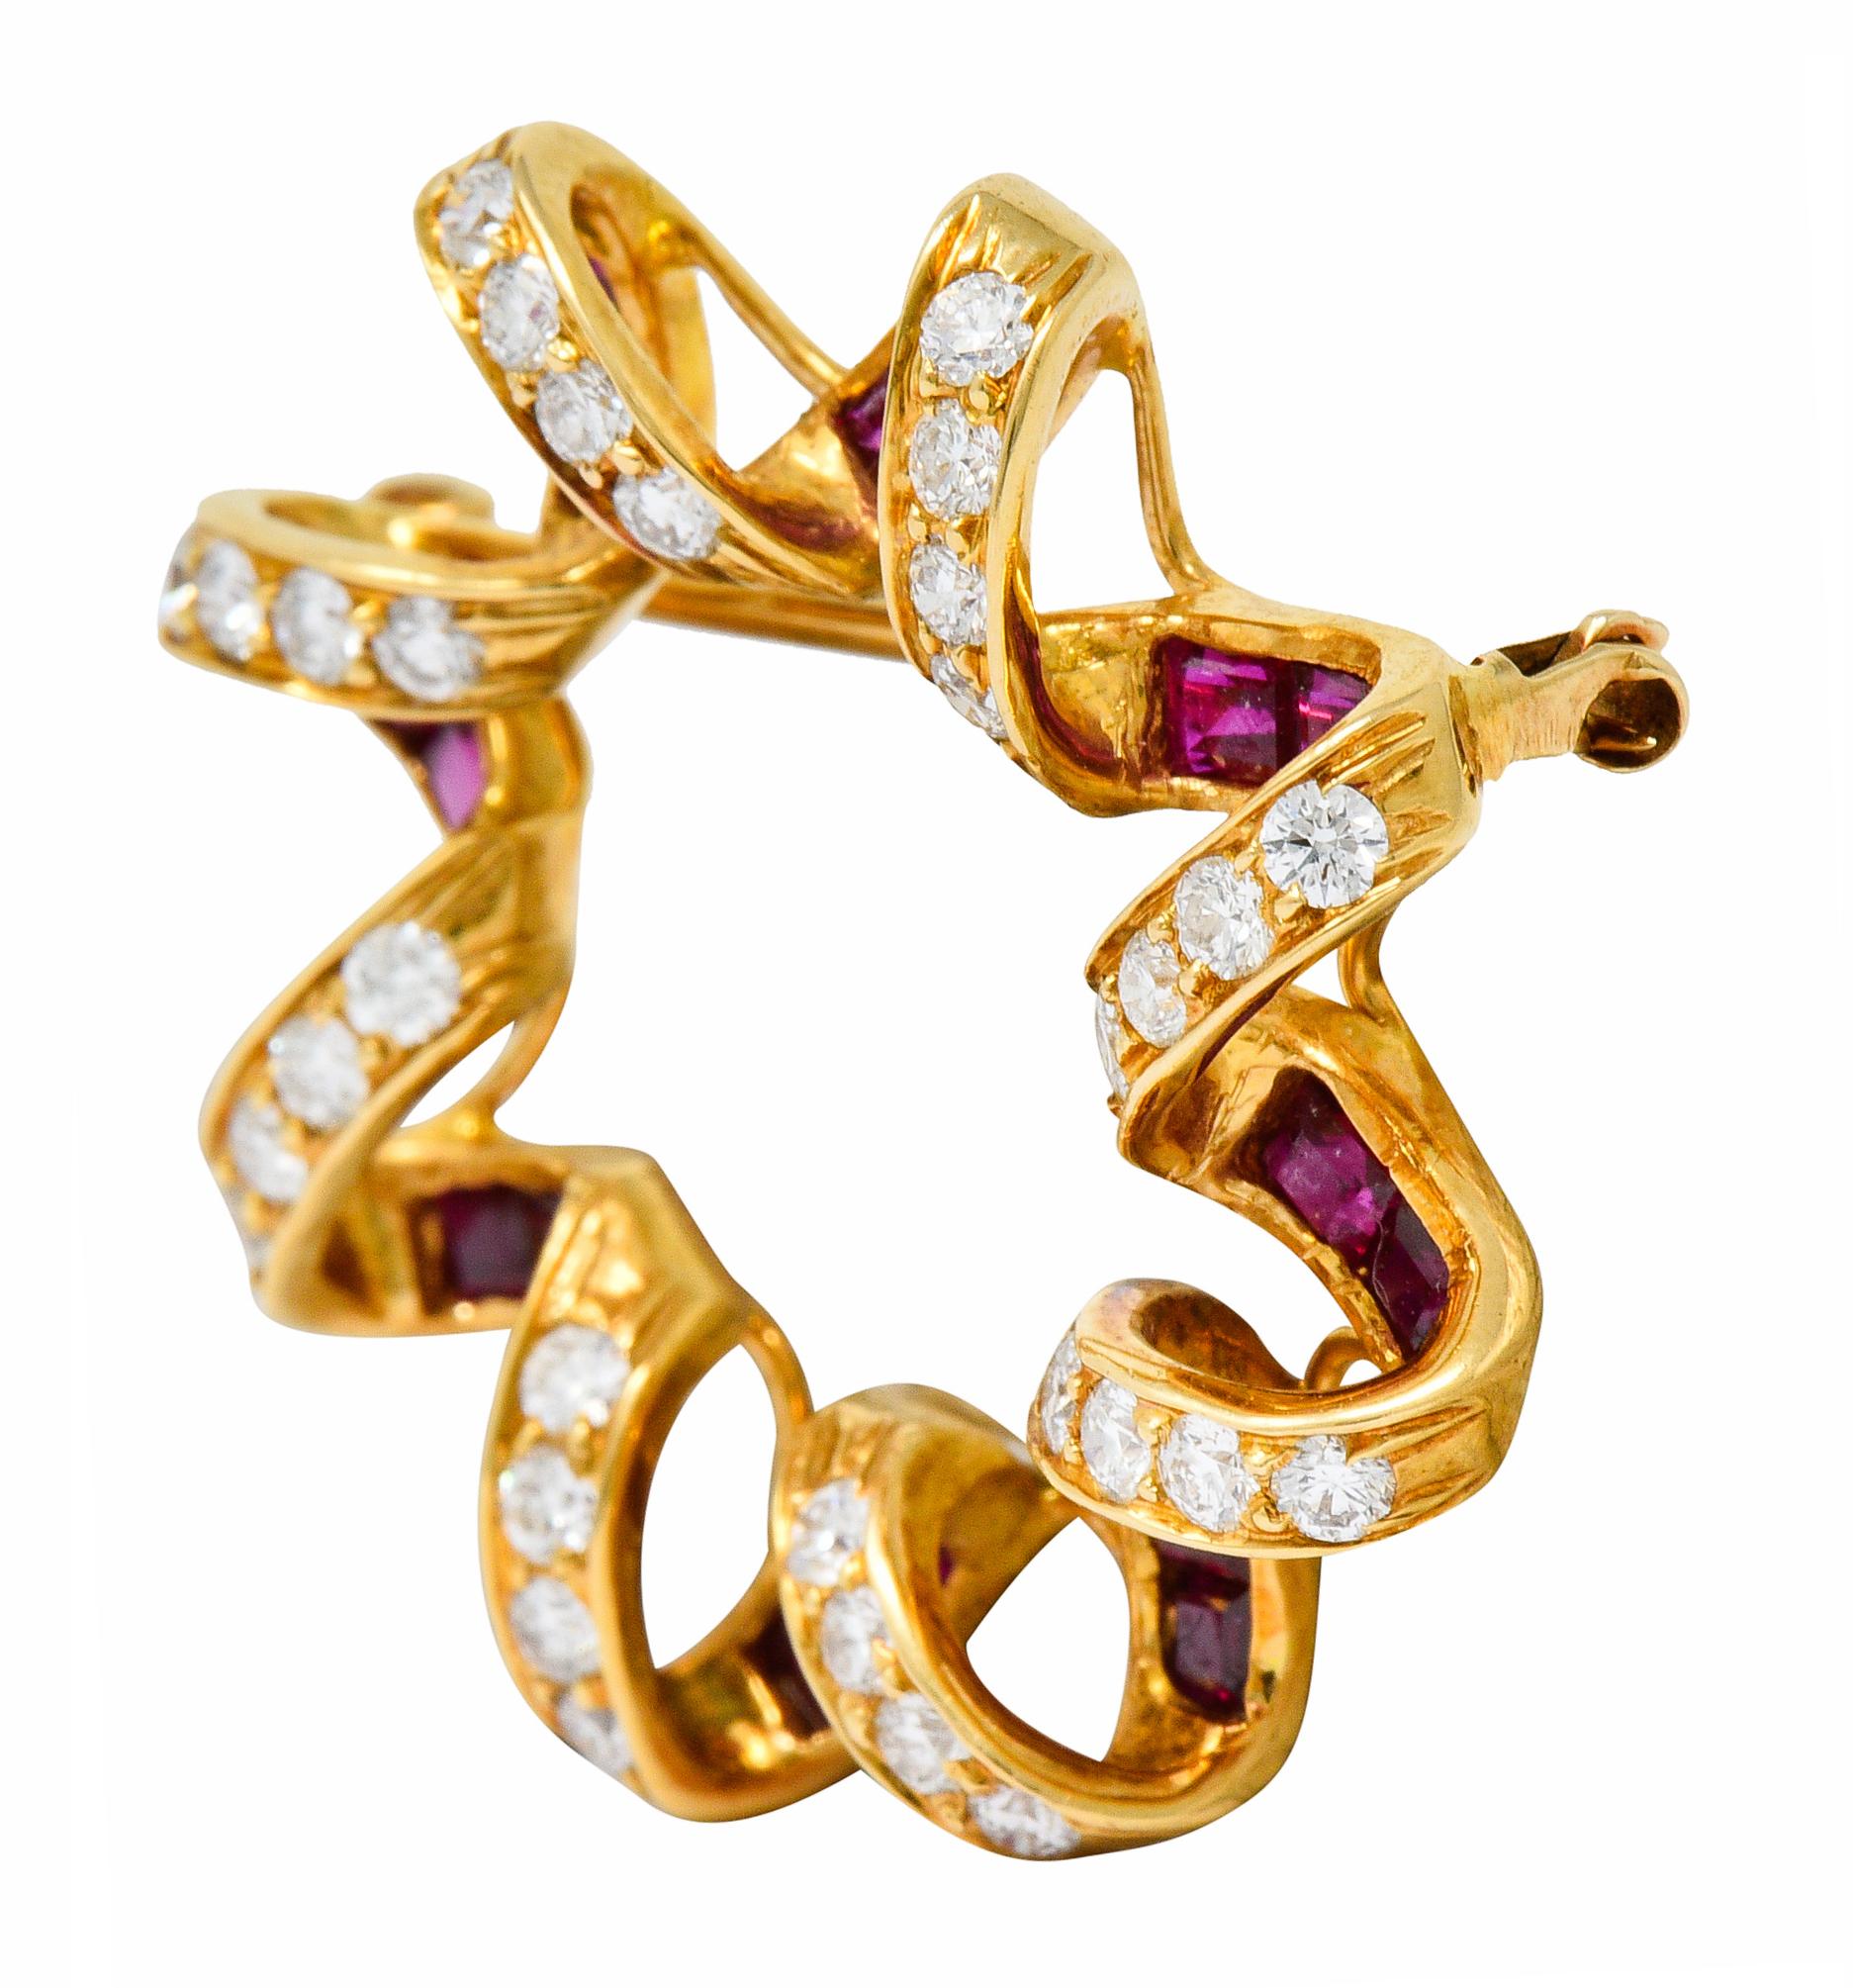 Designed as a stylized starburst with a spiraled gold border

Bead set with round brilliant cut diamonds weighing approximately 0.80 carat; F/G color with SI clarity

With channel set calibrè cut ruby weighing in total approximately 0.95 carat; red